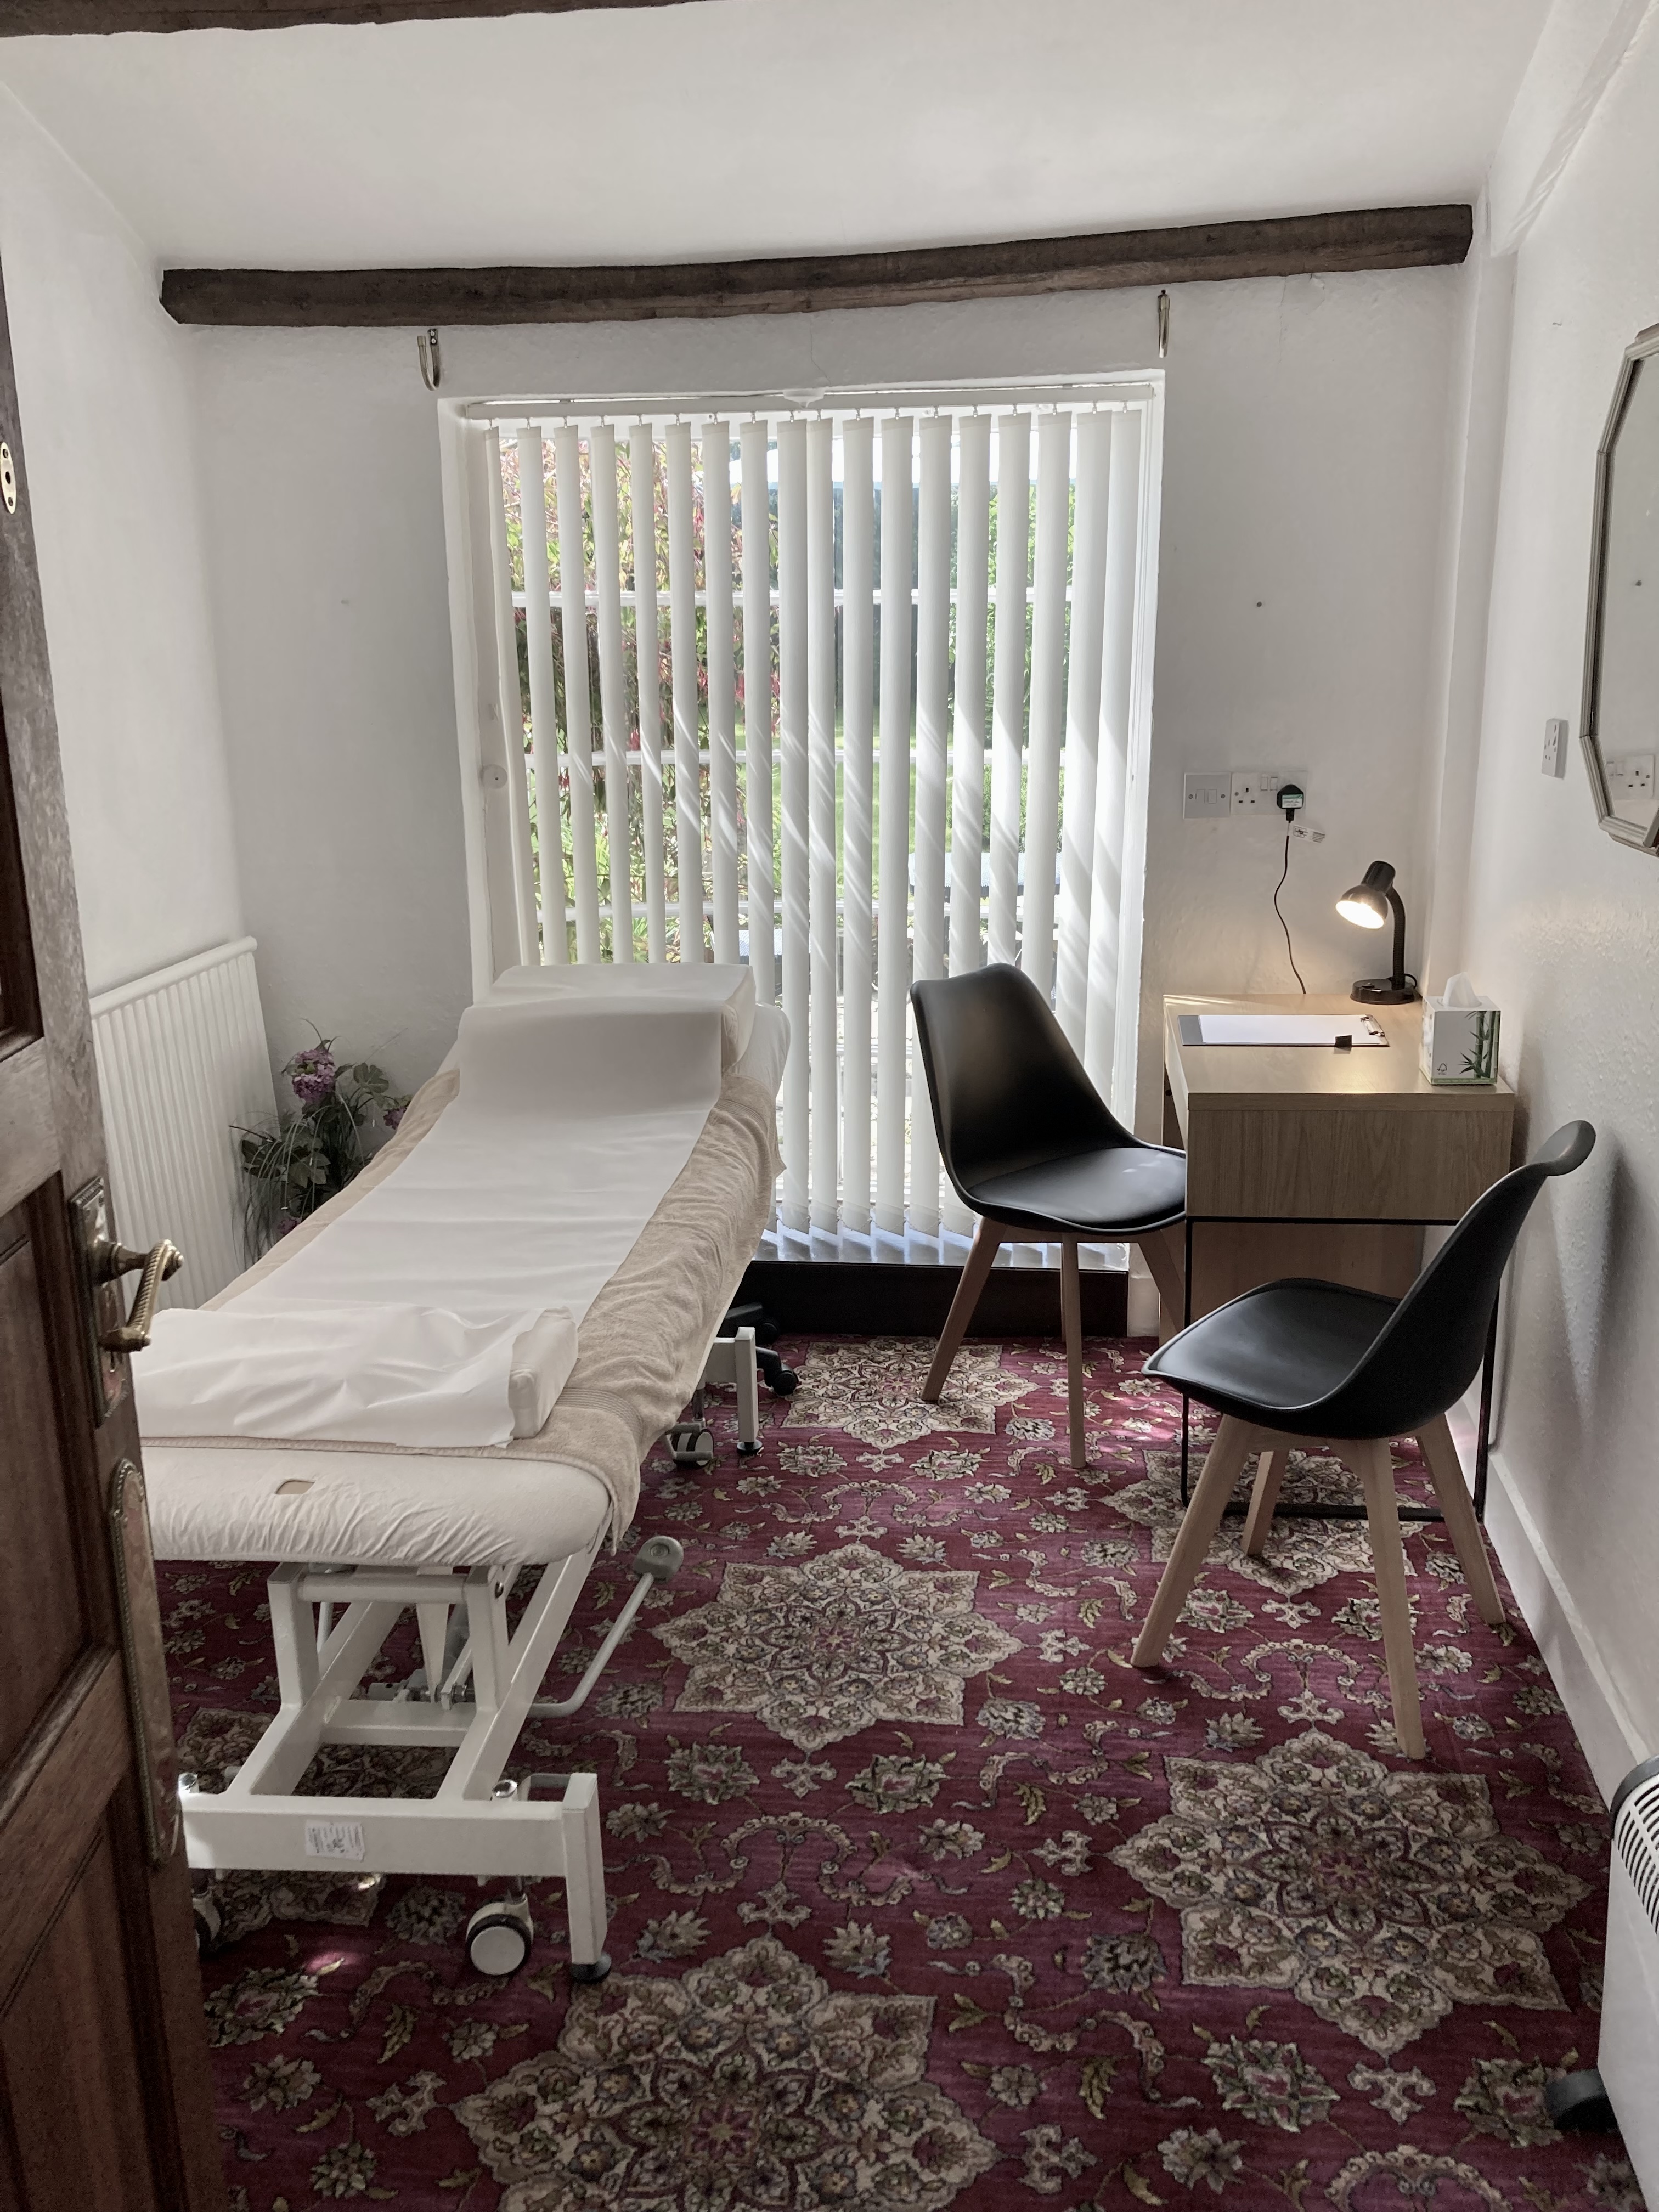 Priory Lane Osteopathic clinic